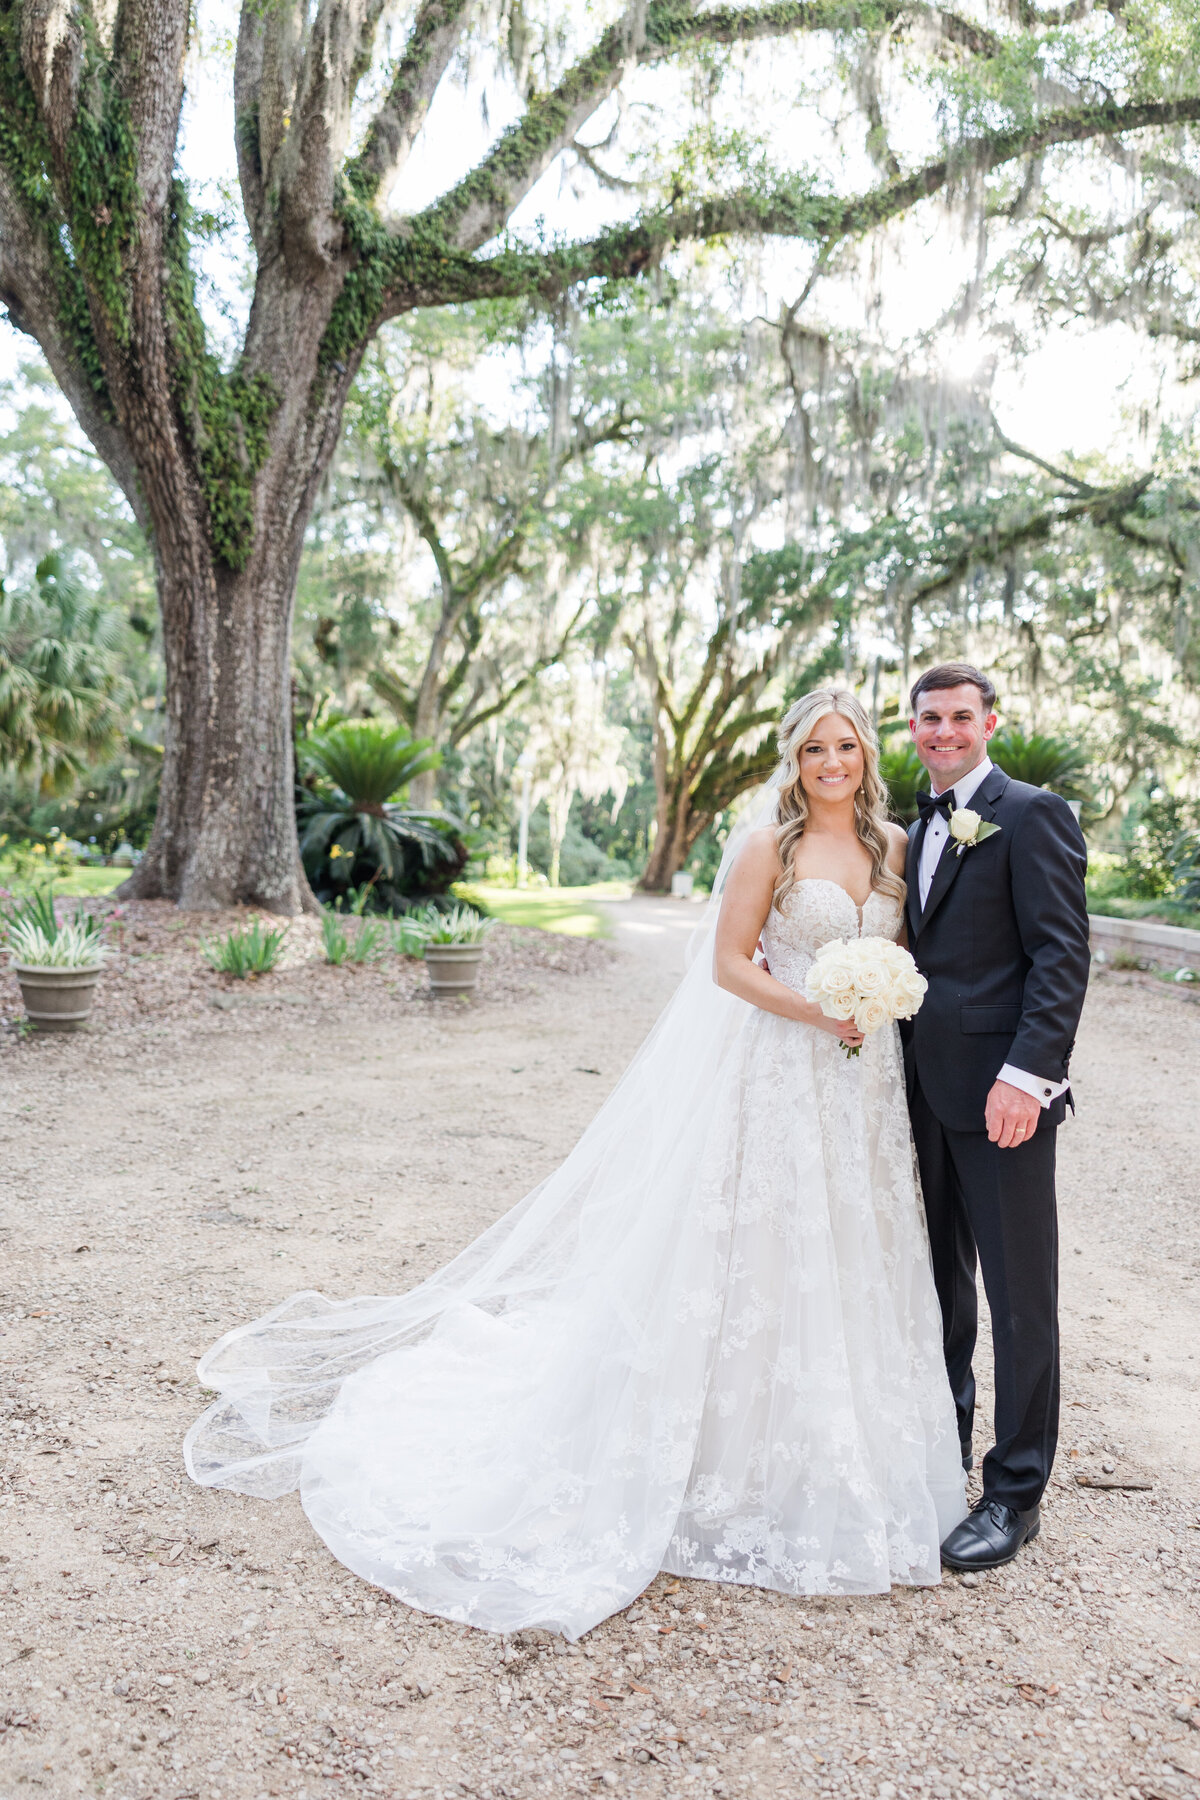 Mary Warren & Justin Wedding - Taylor'd Southern Events - Florida Photographer-2559